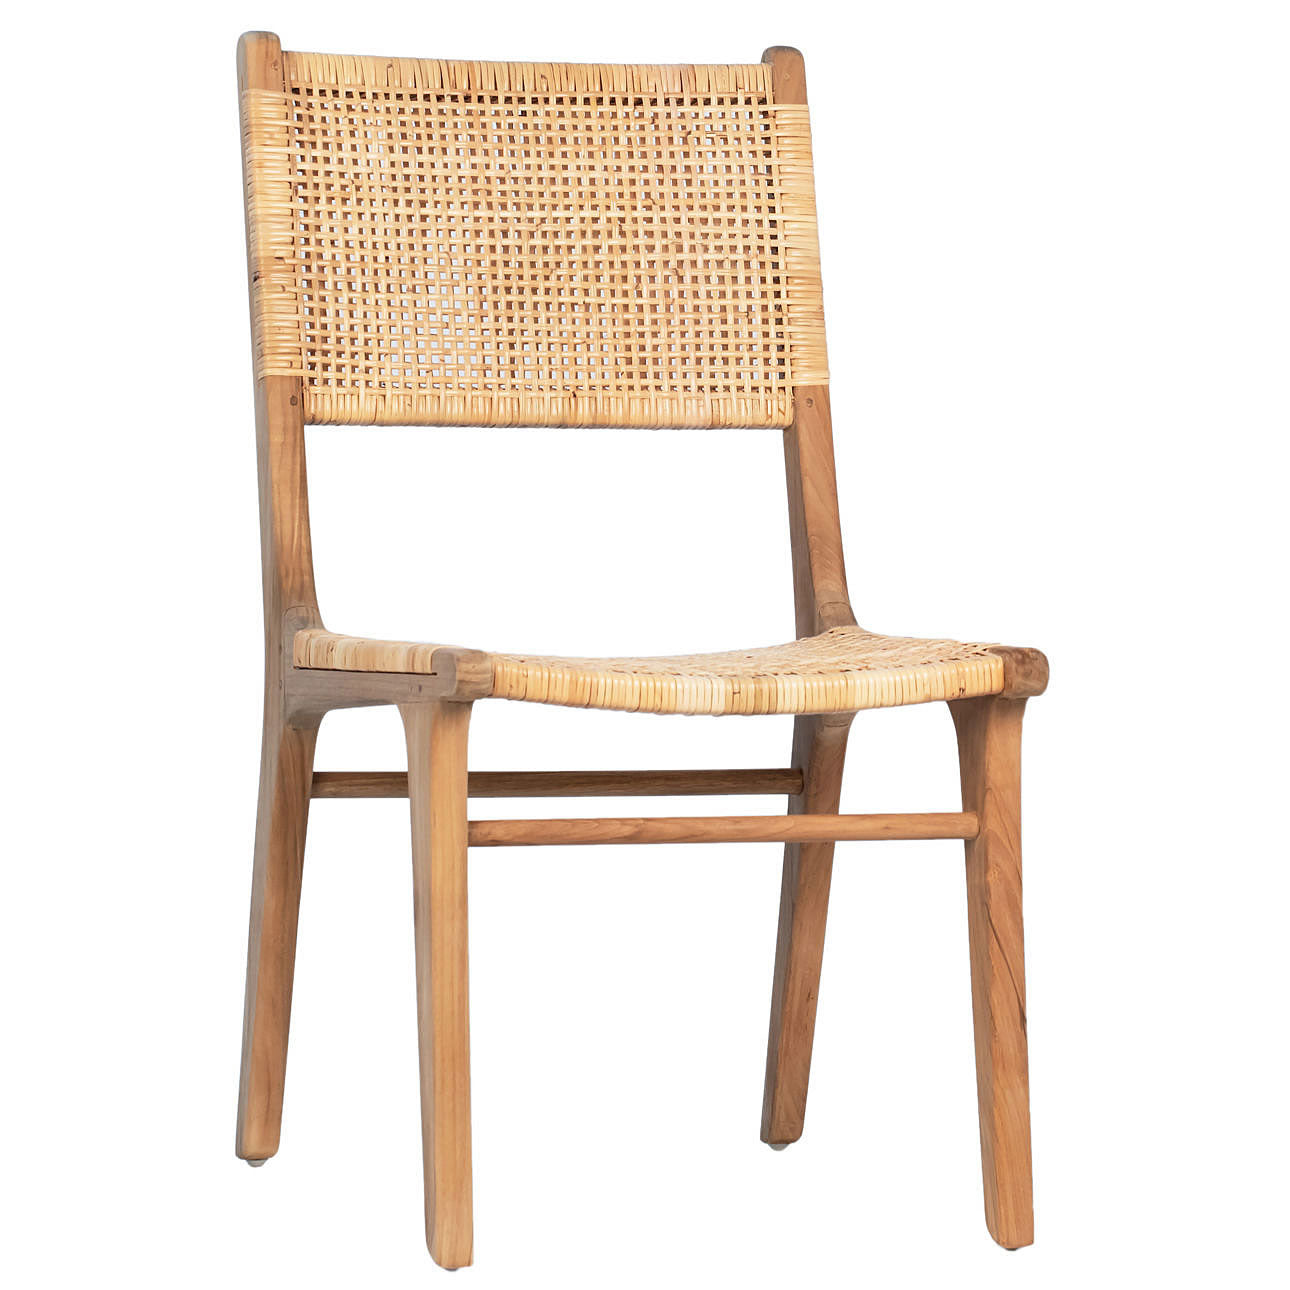 PAIR Emo Dining Chairs in Natural Finish Teak Wood & Rattan Hollywood